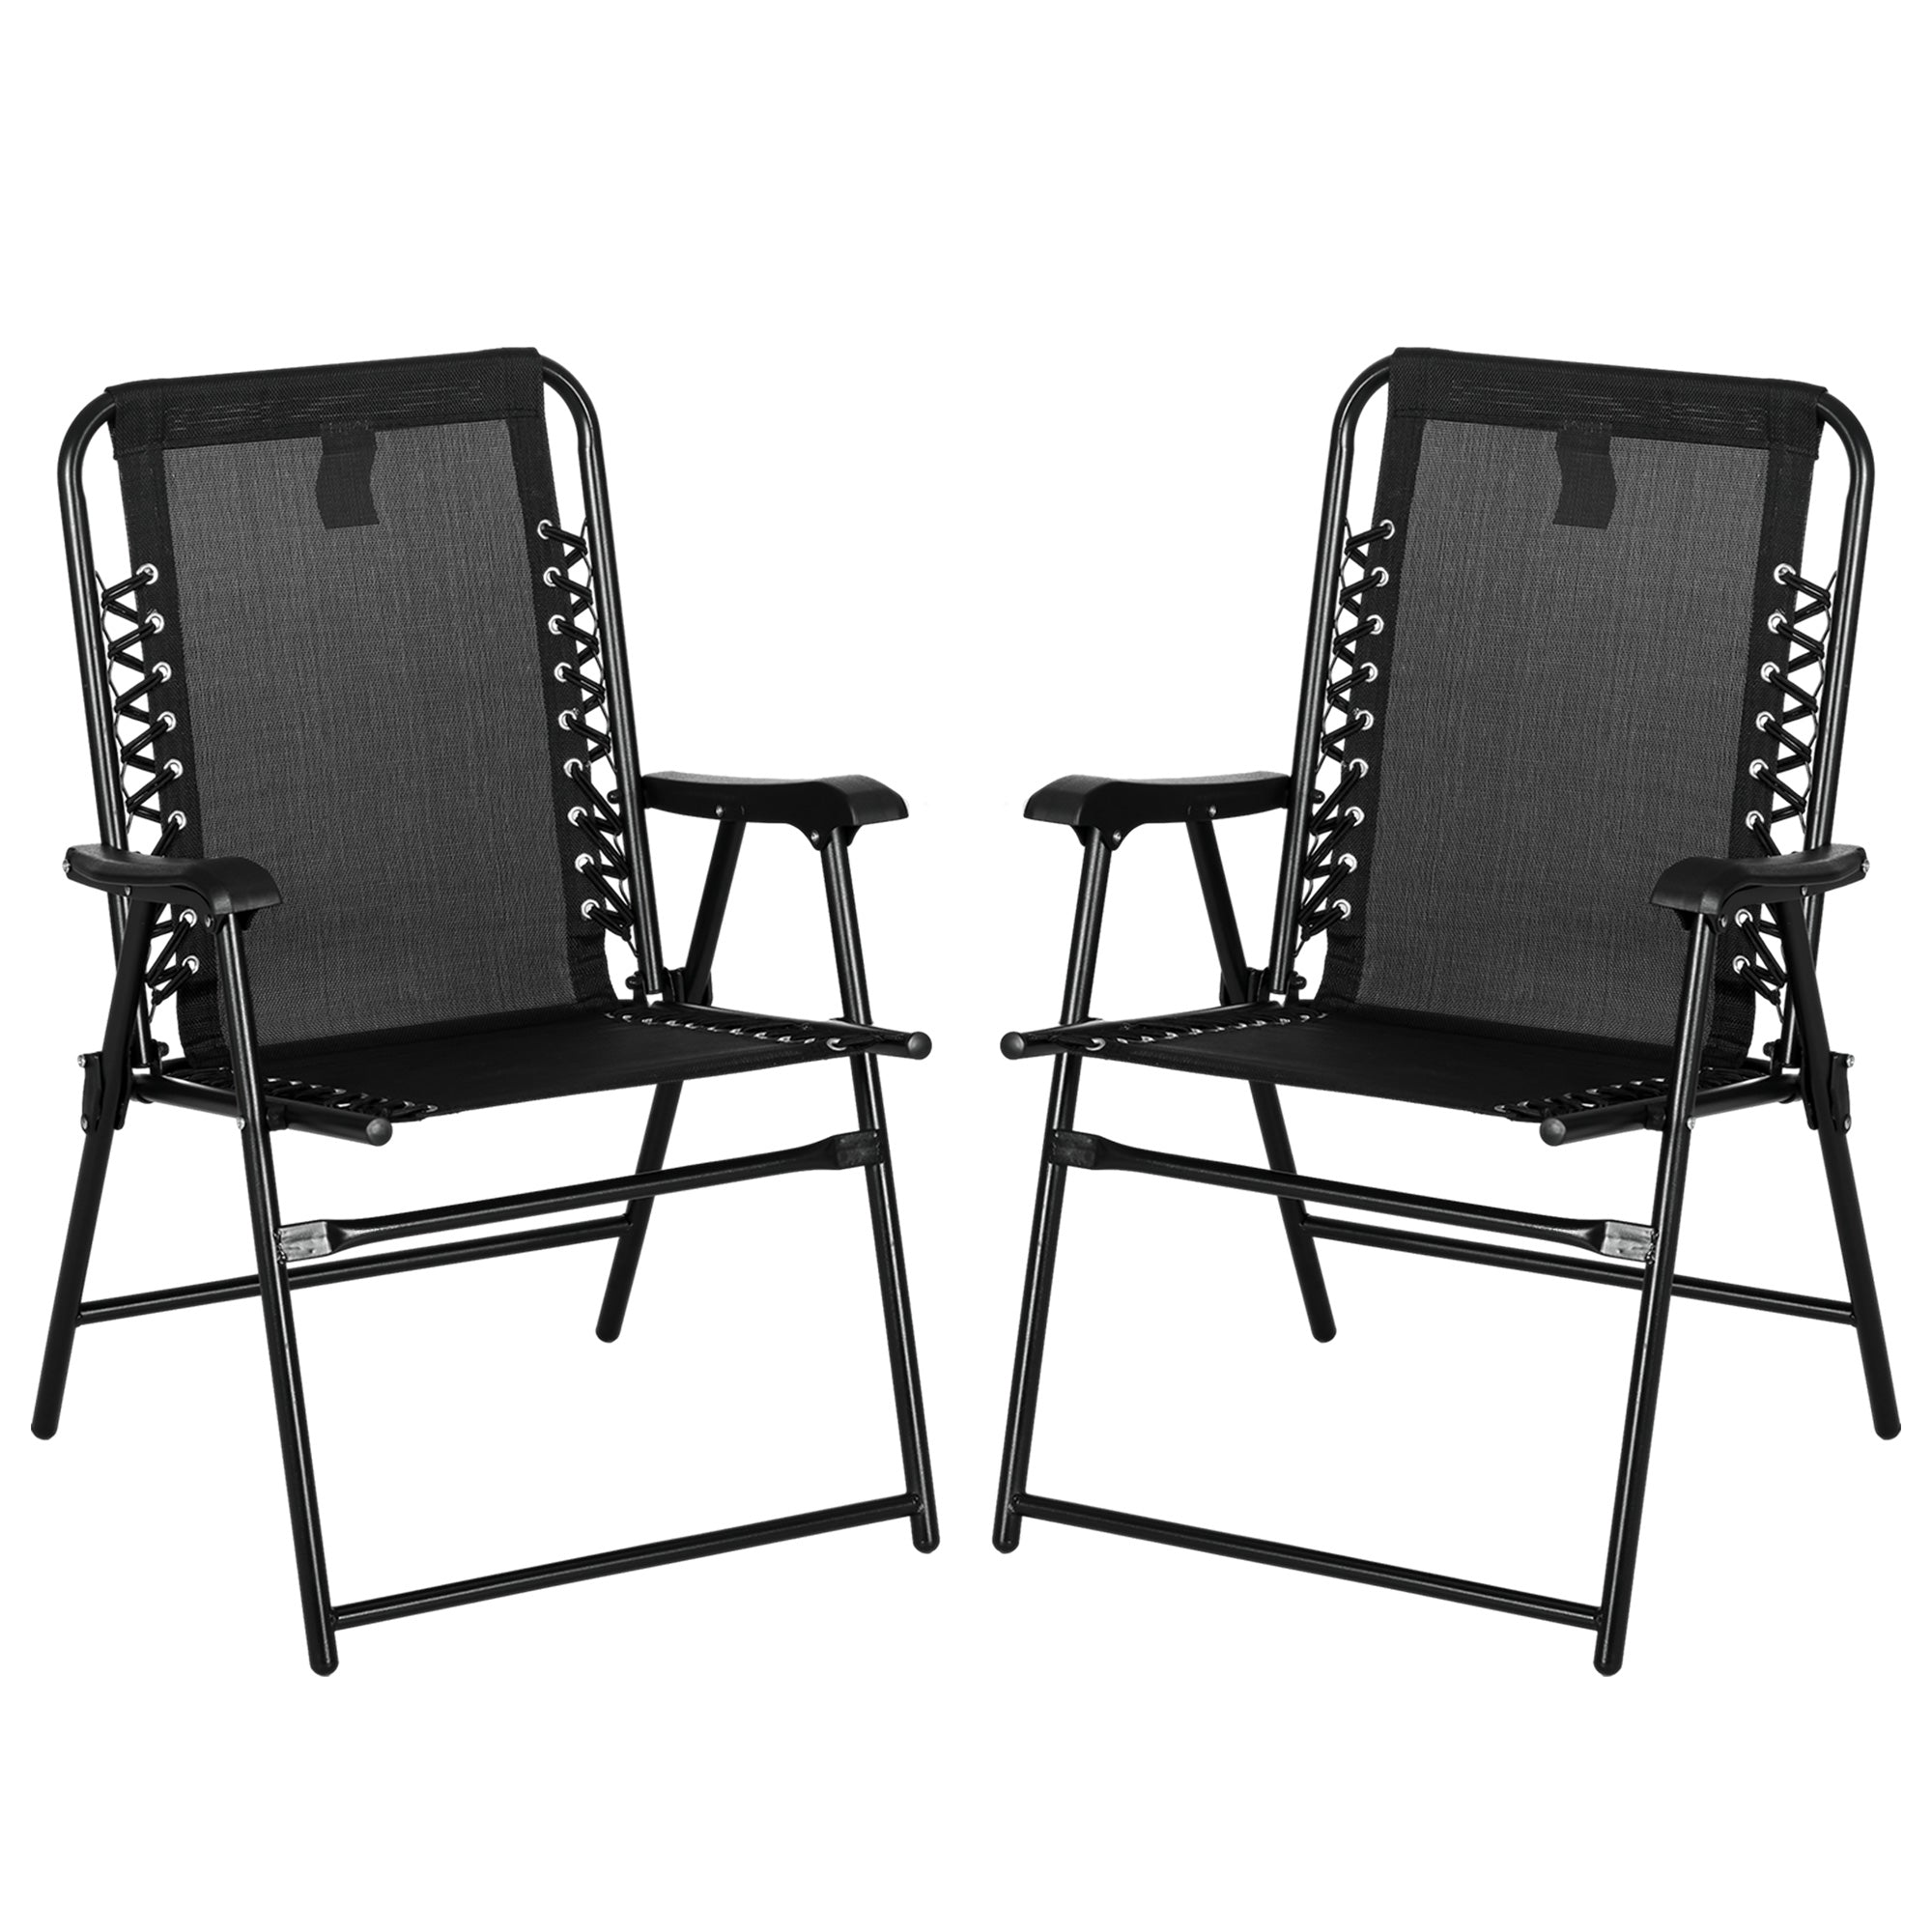 2 Pcs Patio Folding Chair Set, Outdoor Portable Loungers for Camping Pool Beach Deck, Lawn w/ Armrest Steel Frame Black-0